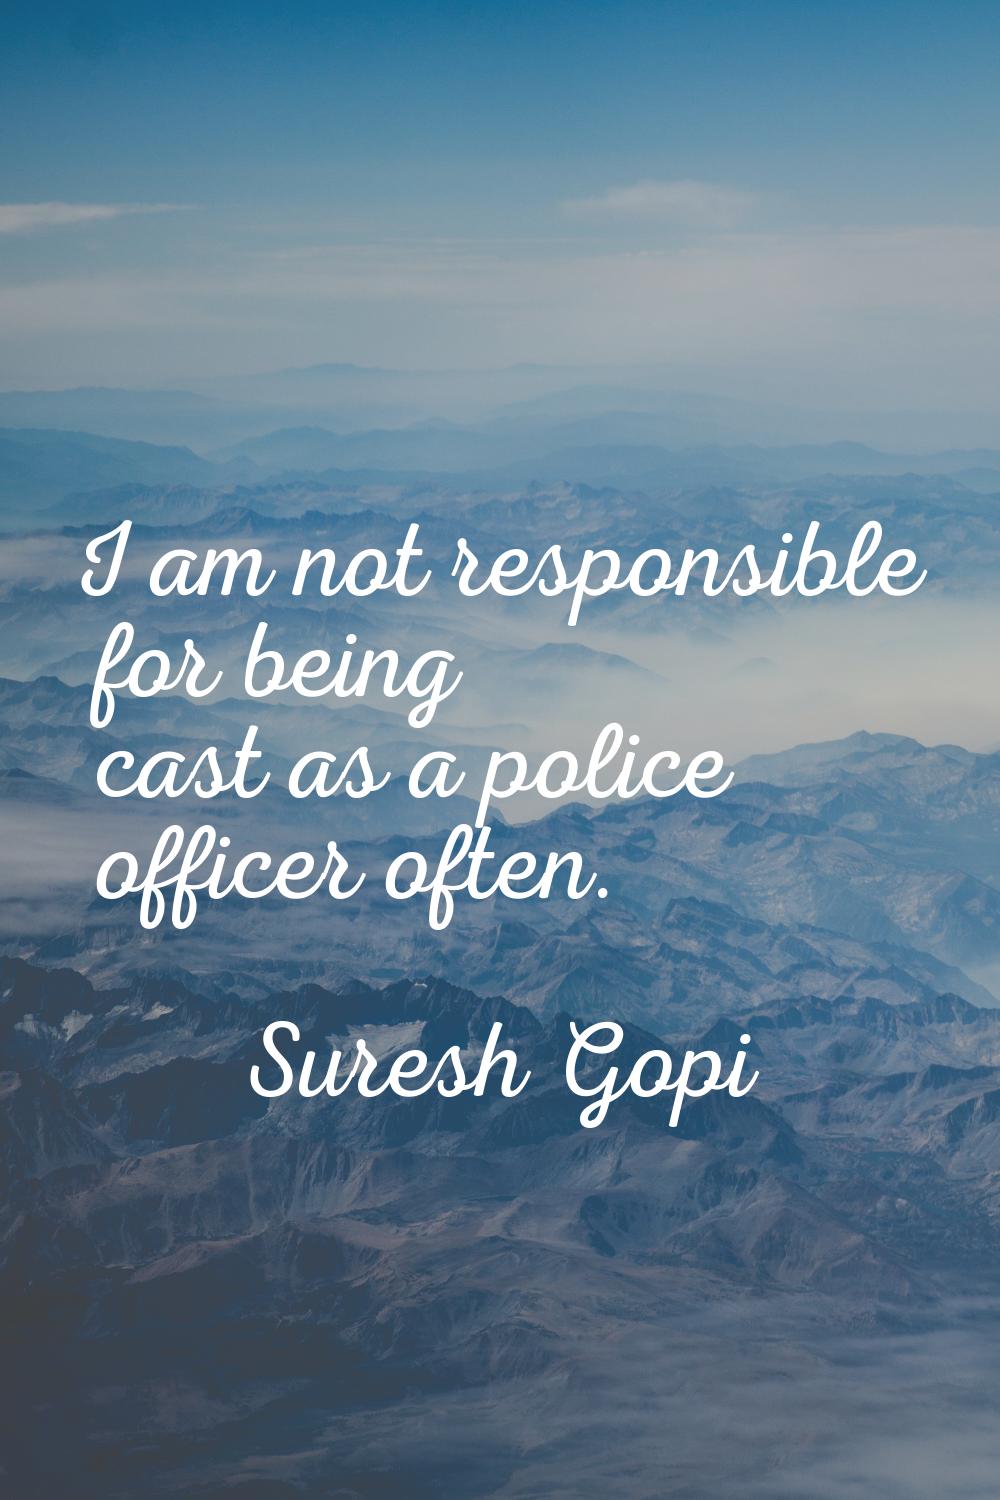 I am not responsible for being cast as a police officer often.